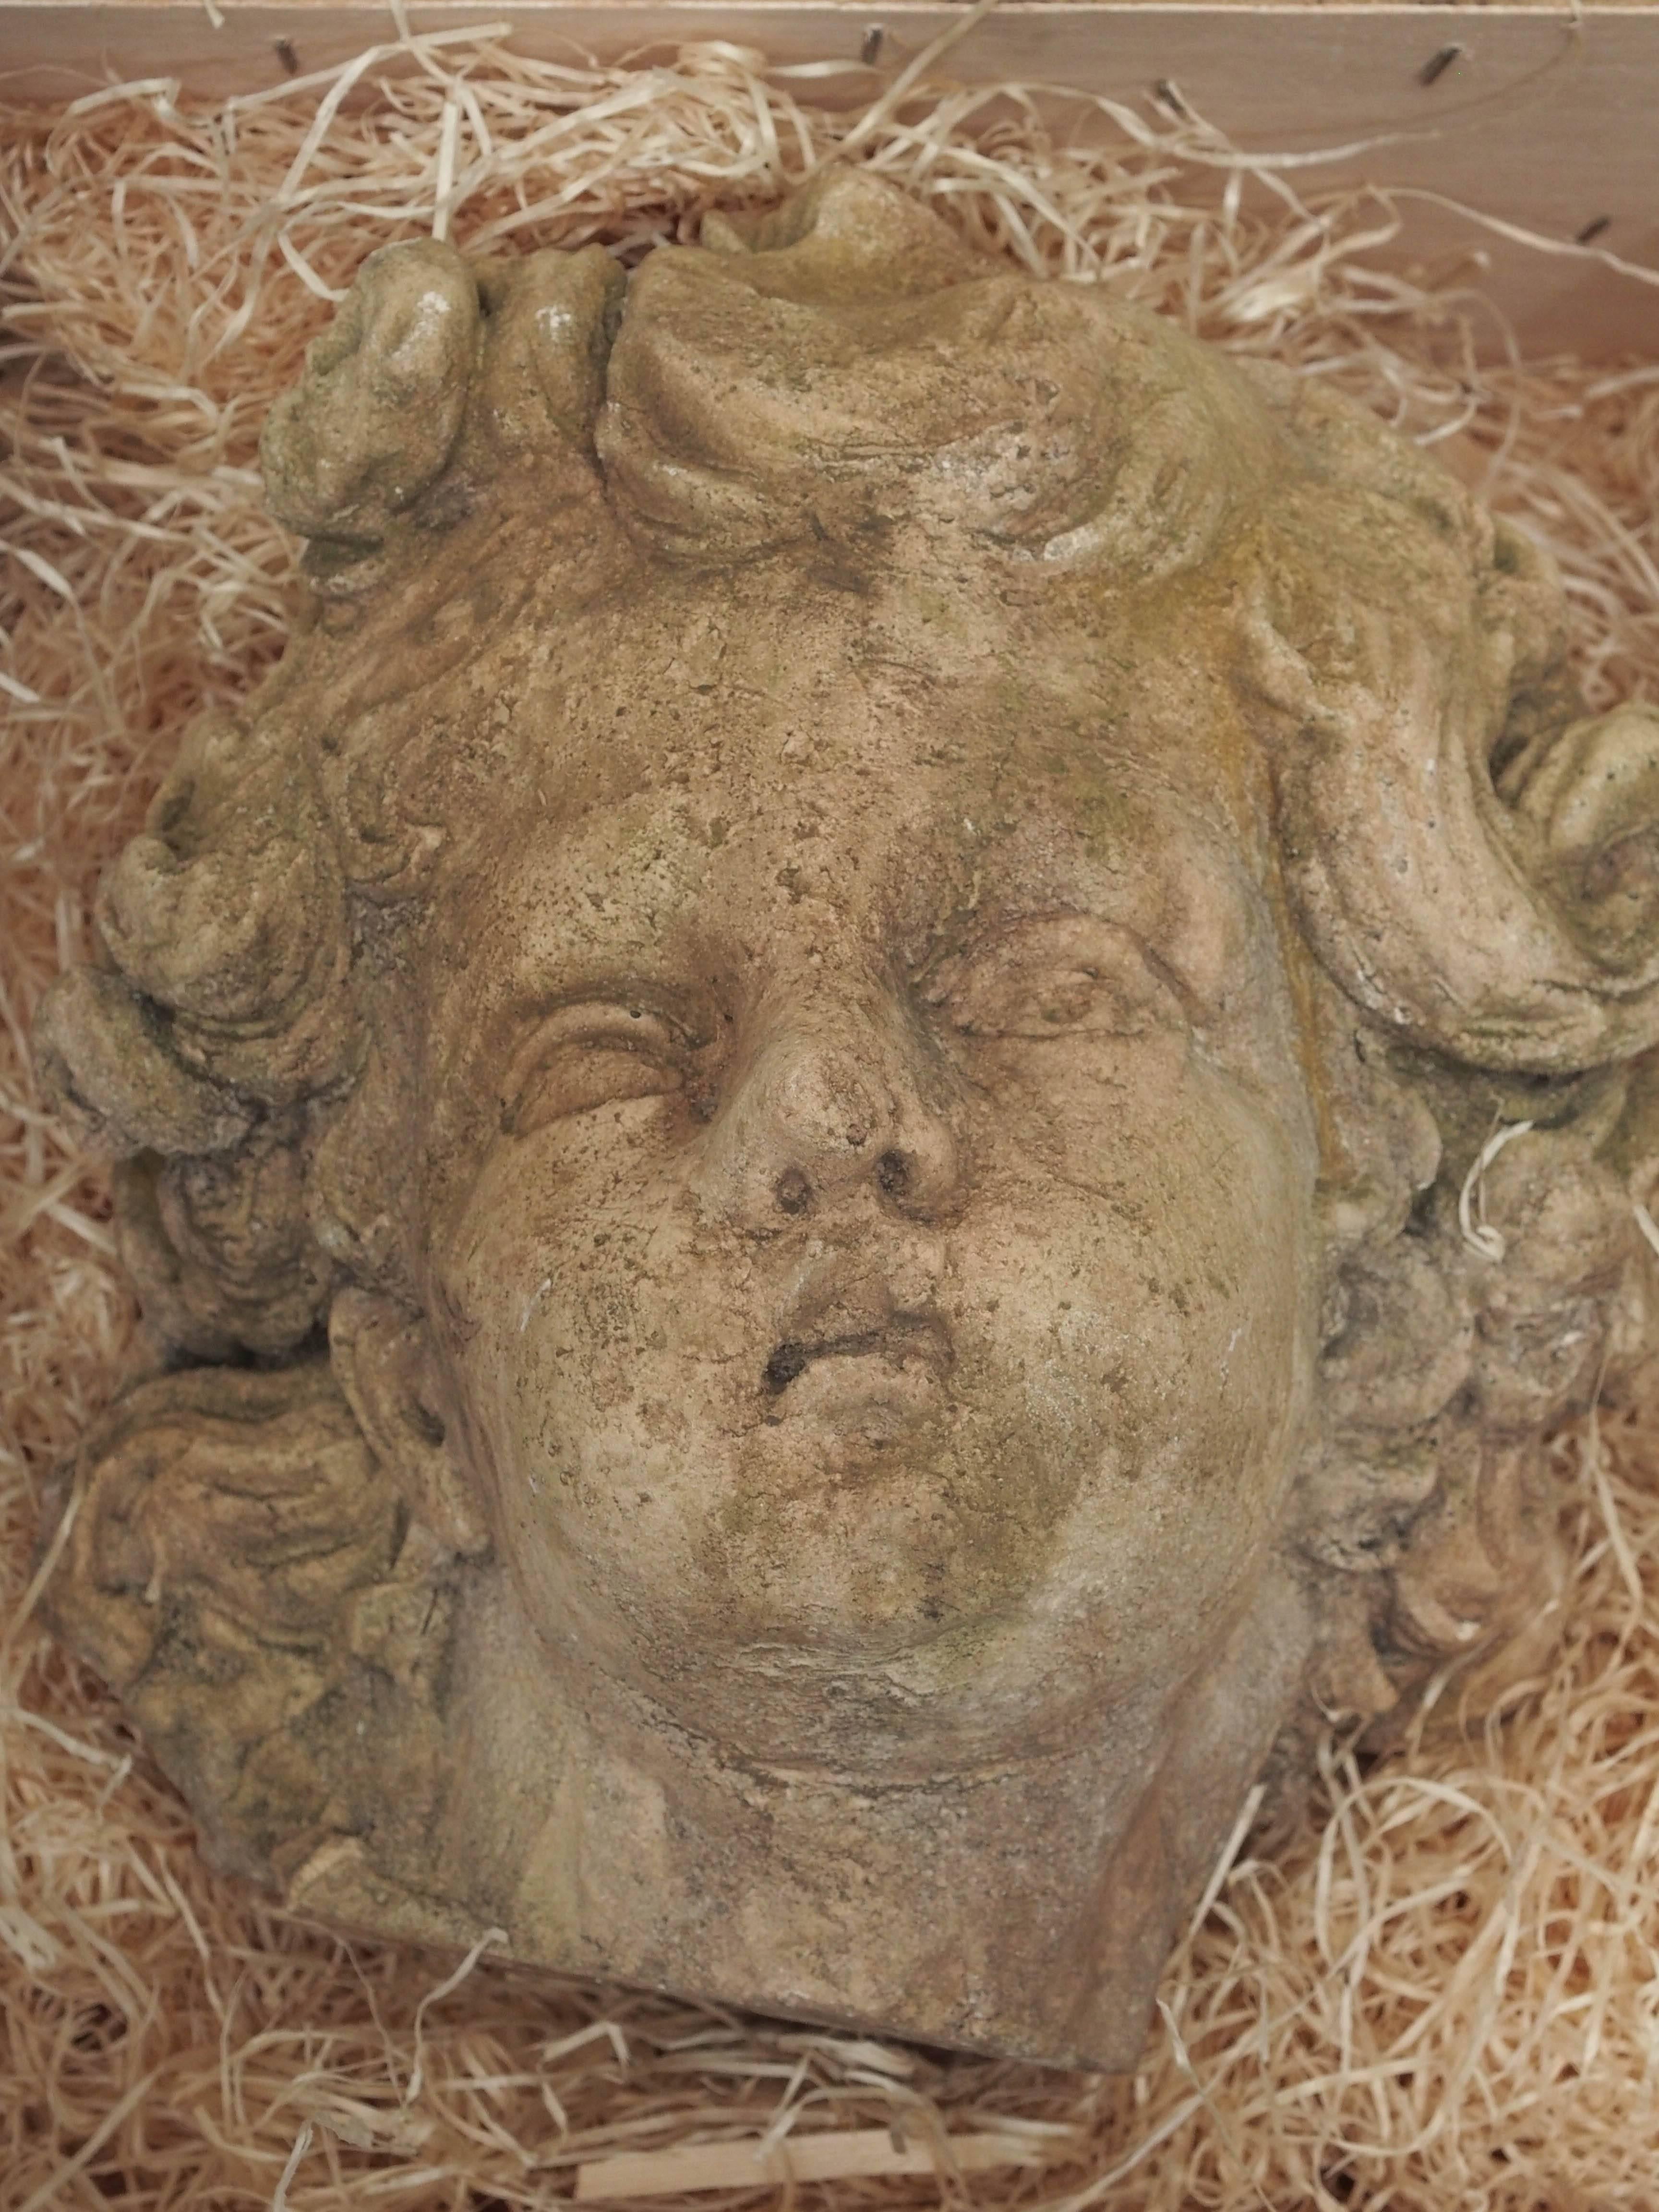 A plaster sculpted head of a cherub created during the late 19th century.